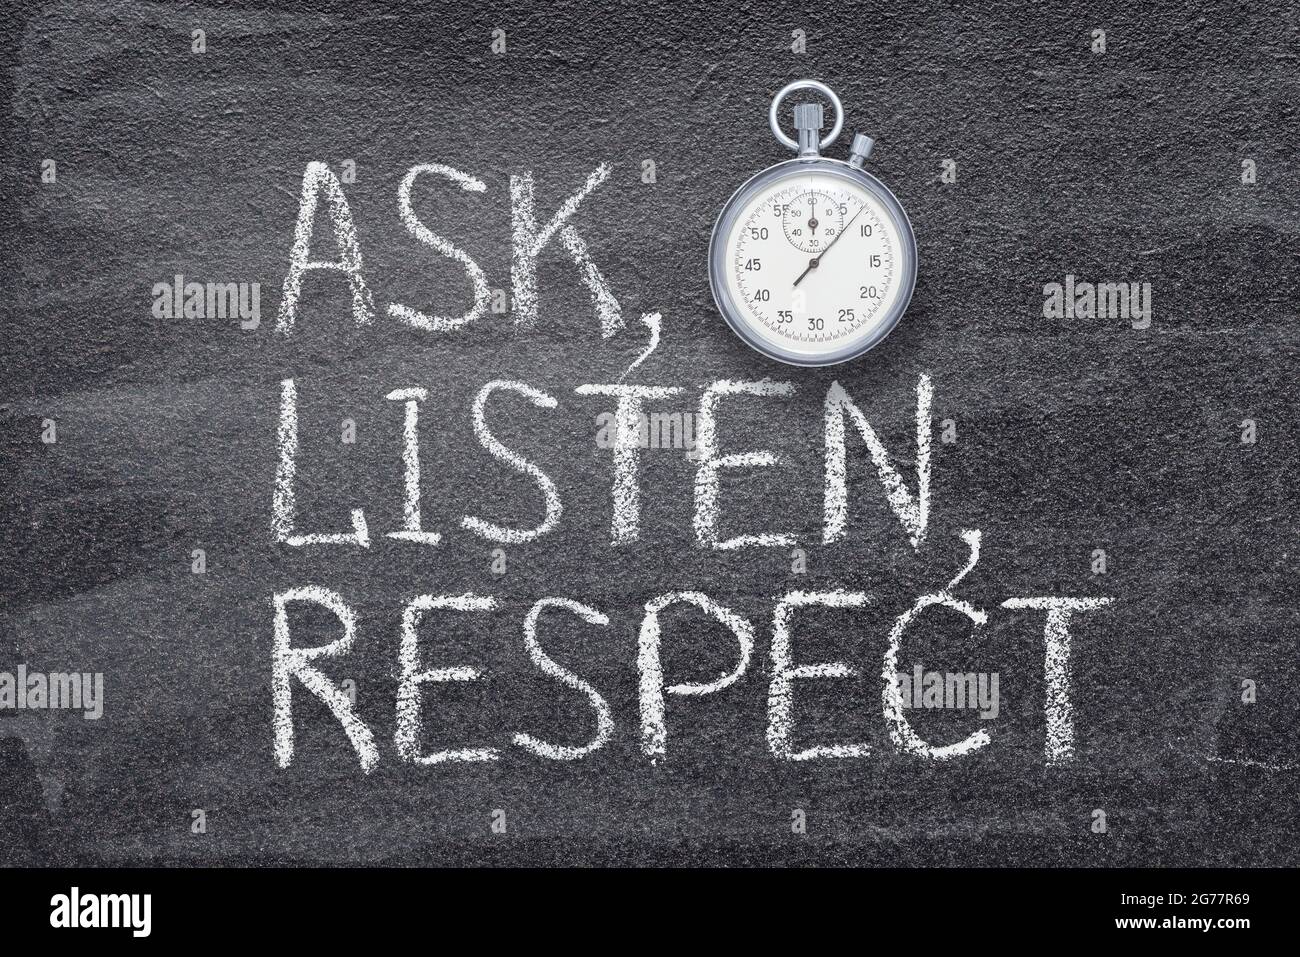 ask, listen, respect  words written on chalkboard with vintage precise stopwatch Stock Photo